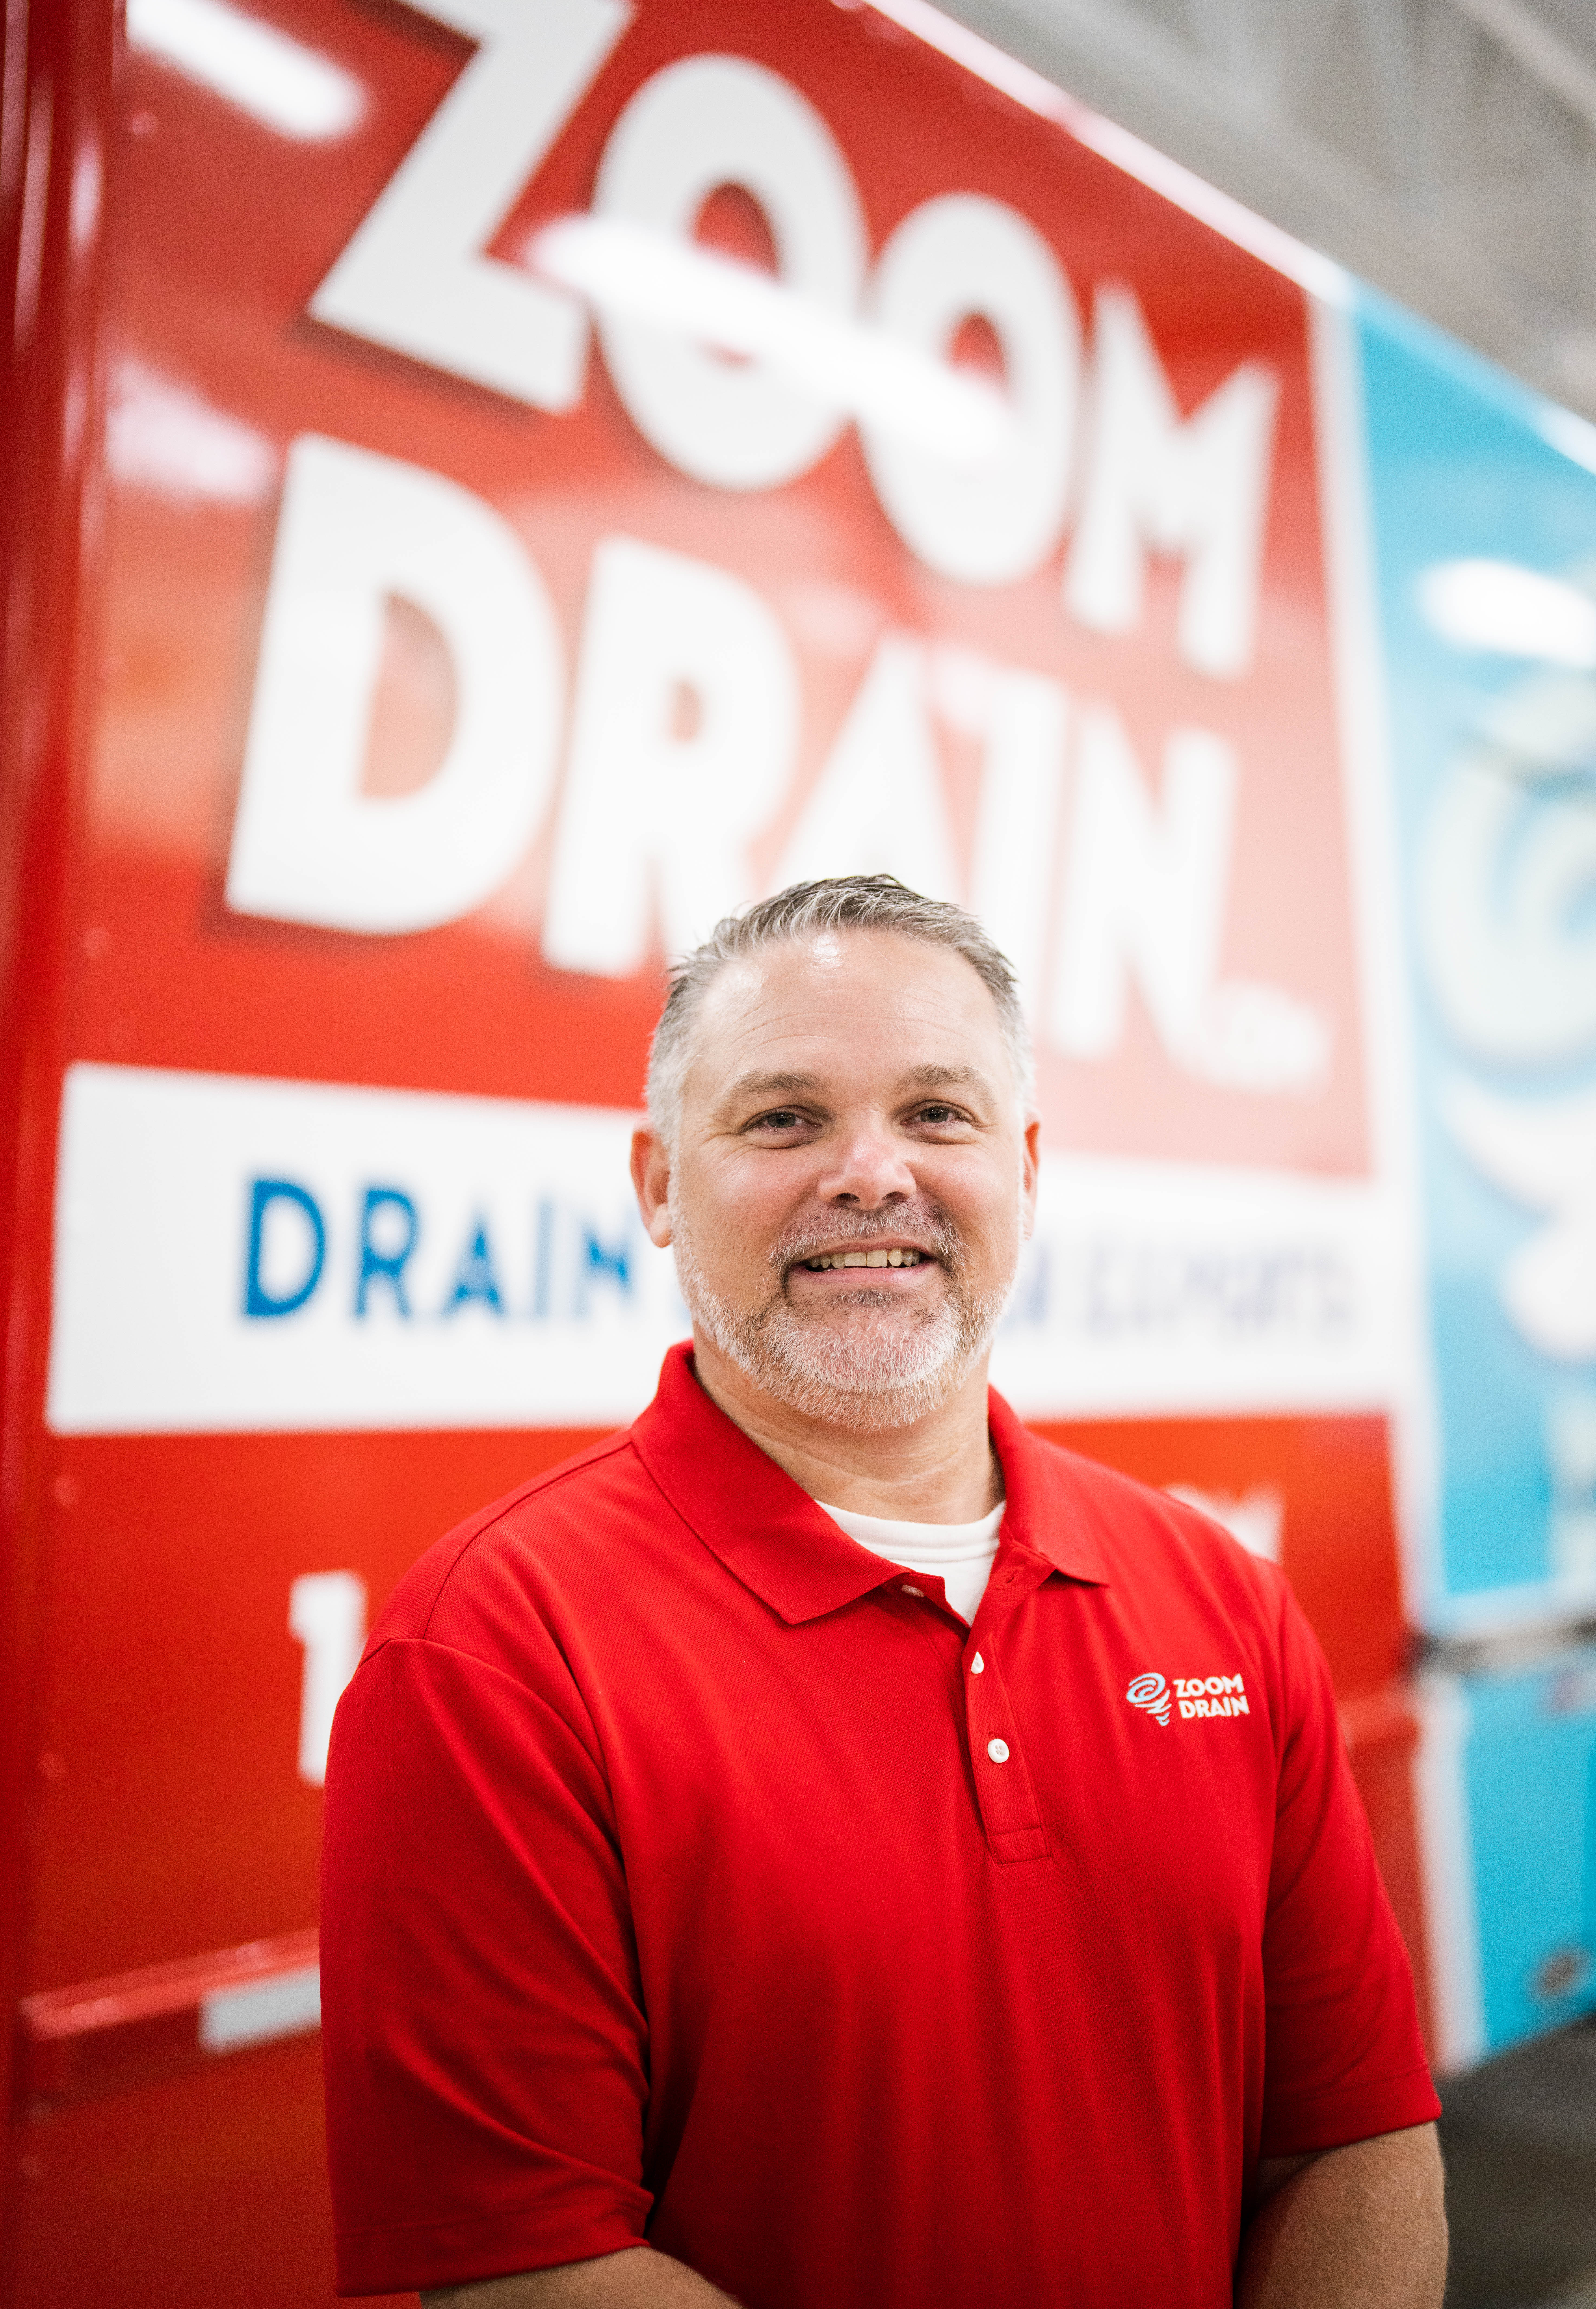 Now Open: Get To Know The Owners Of Zoom Drain Collin County!